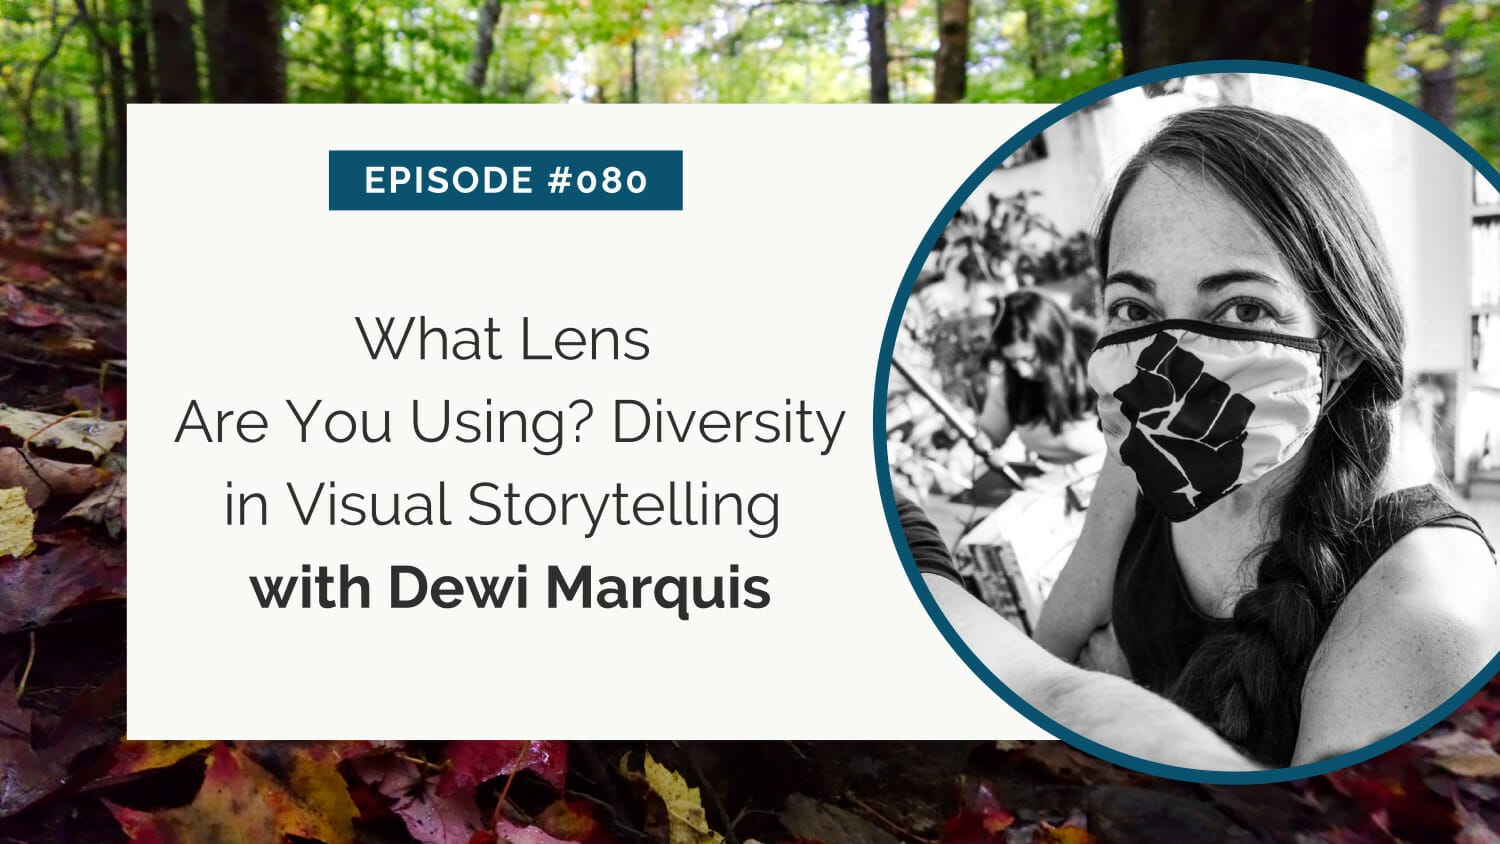 Podcast episode graphic featuring a person wearing a mask and the episode title "what lens are you using? diversity in visual storytelling with dewi marquis" against a backdrop of a forest.